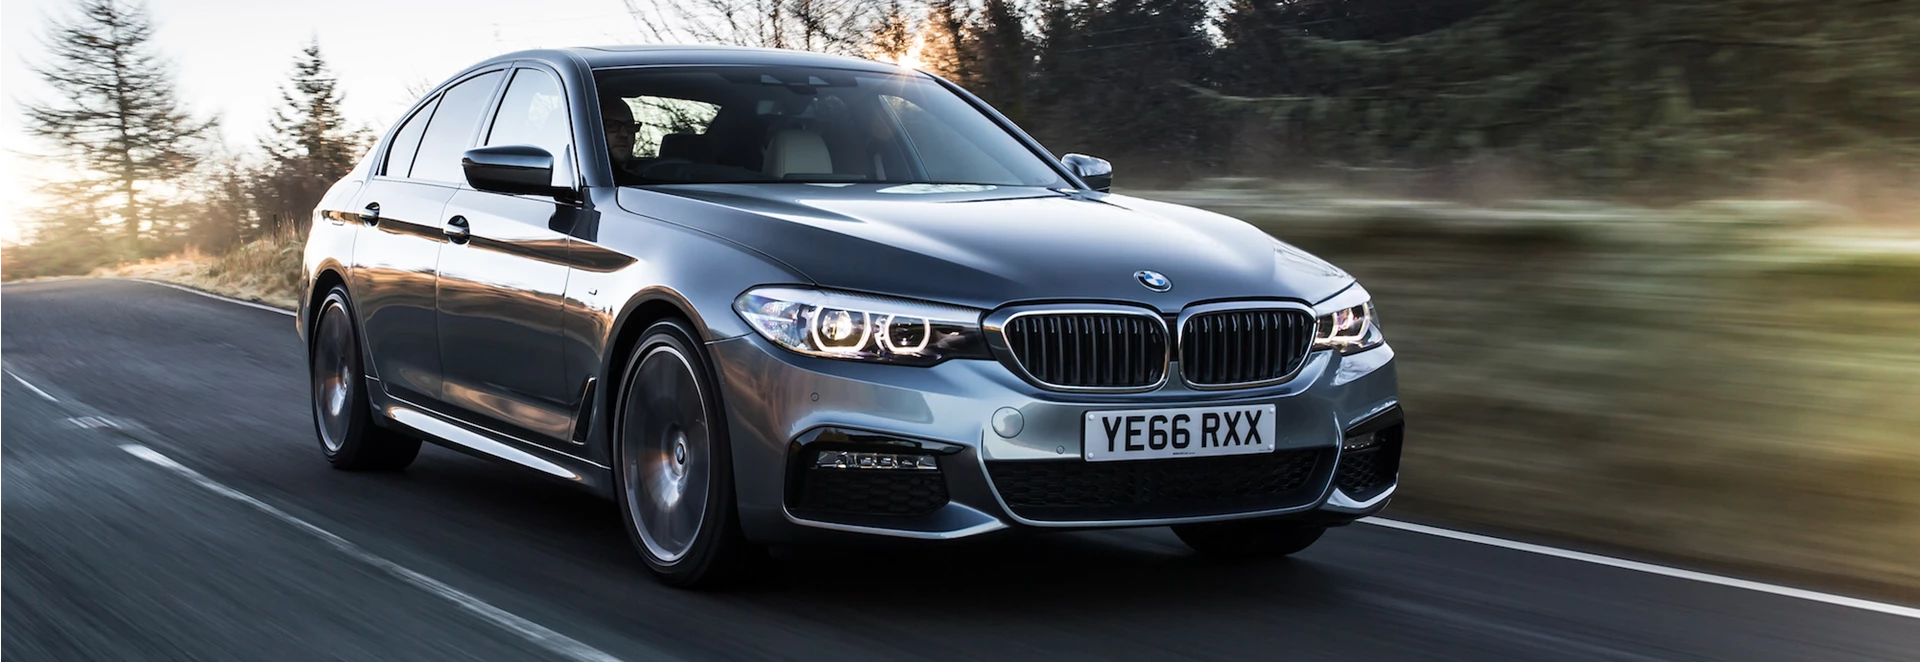 Why the BMW 5 Series is the ideal business car?